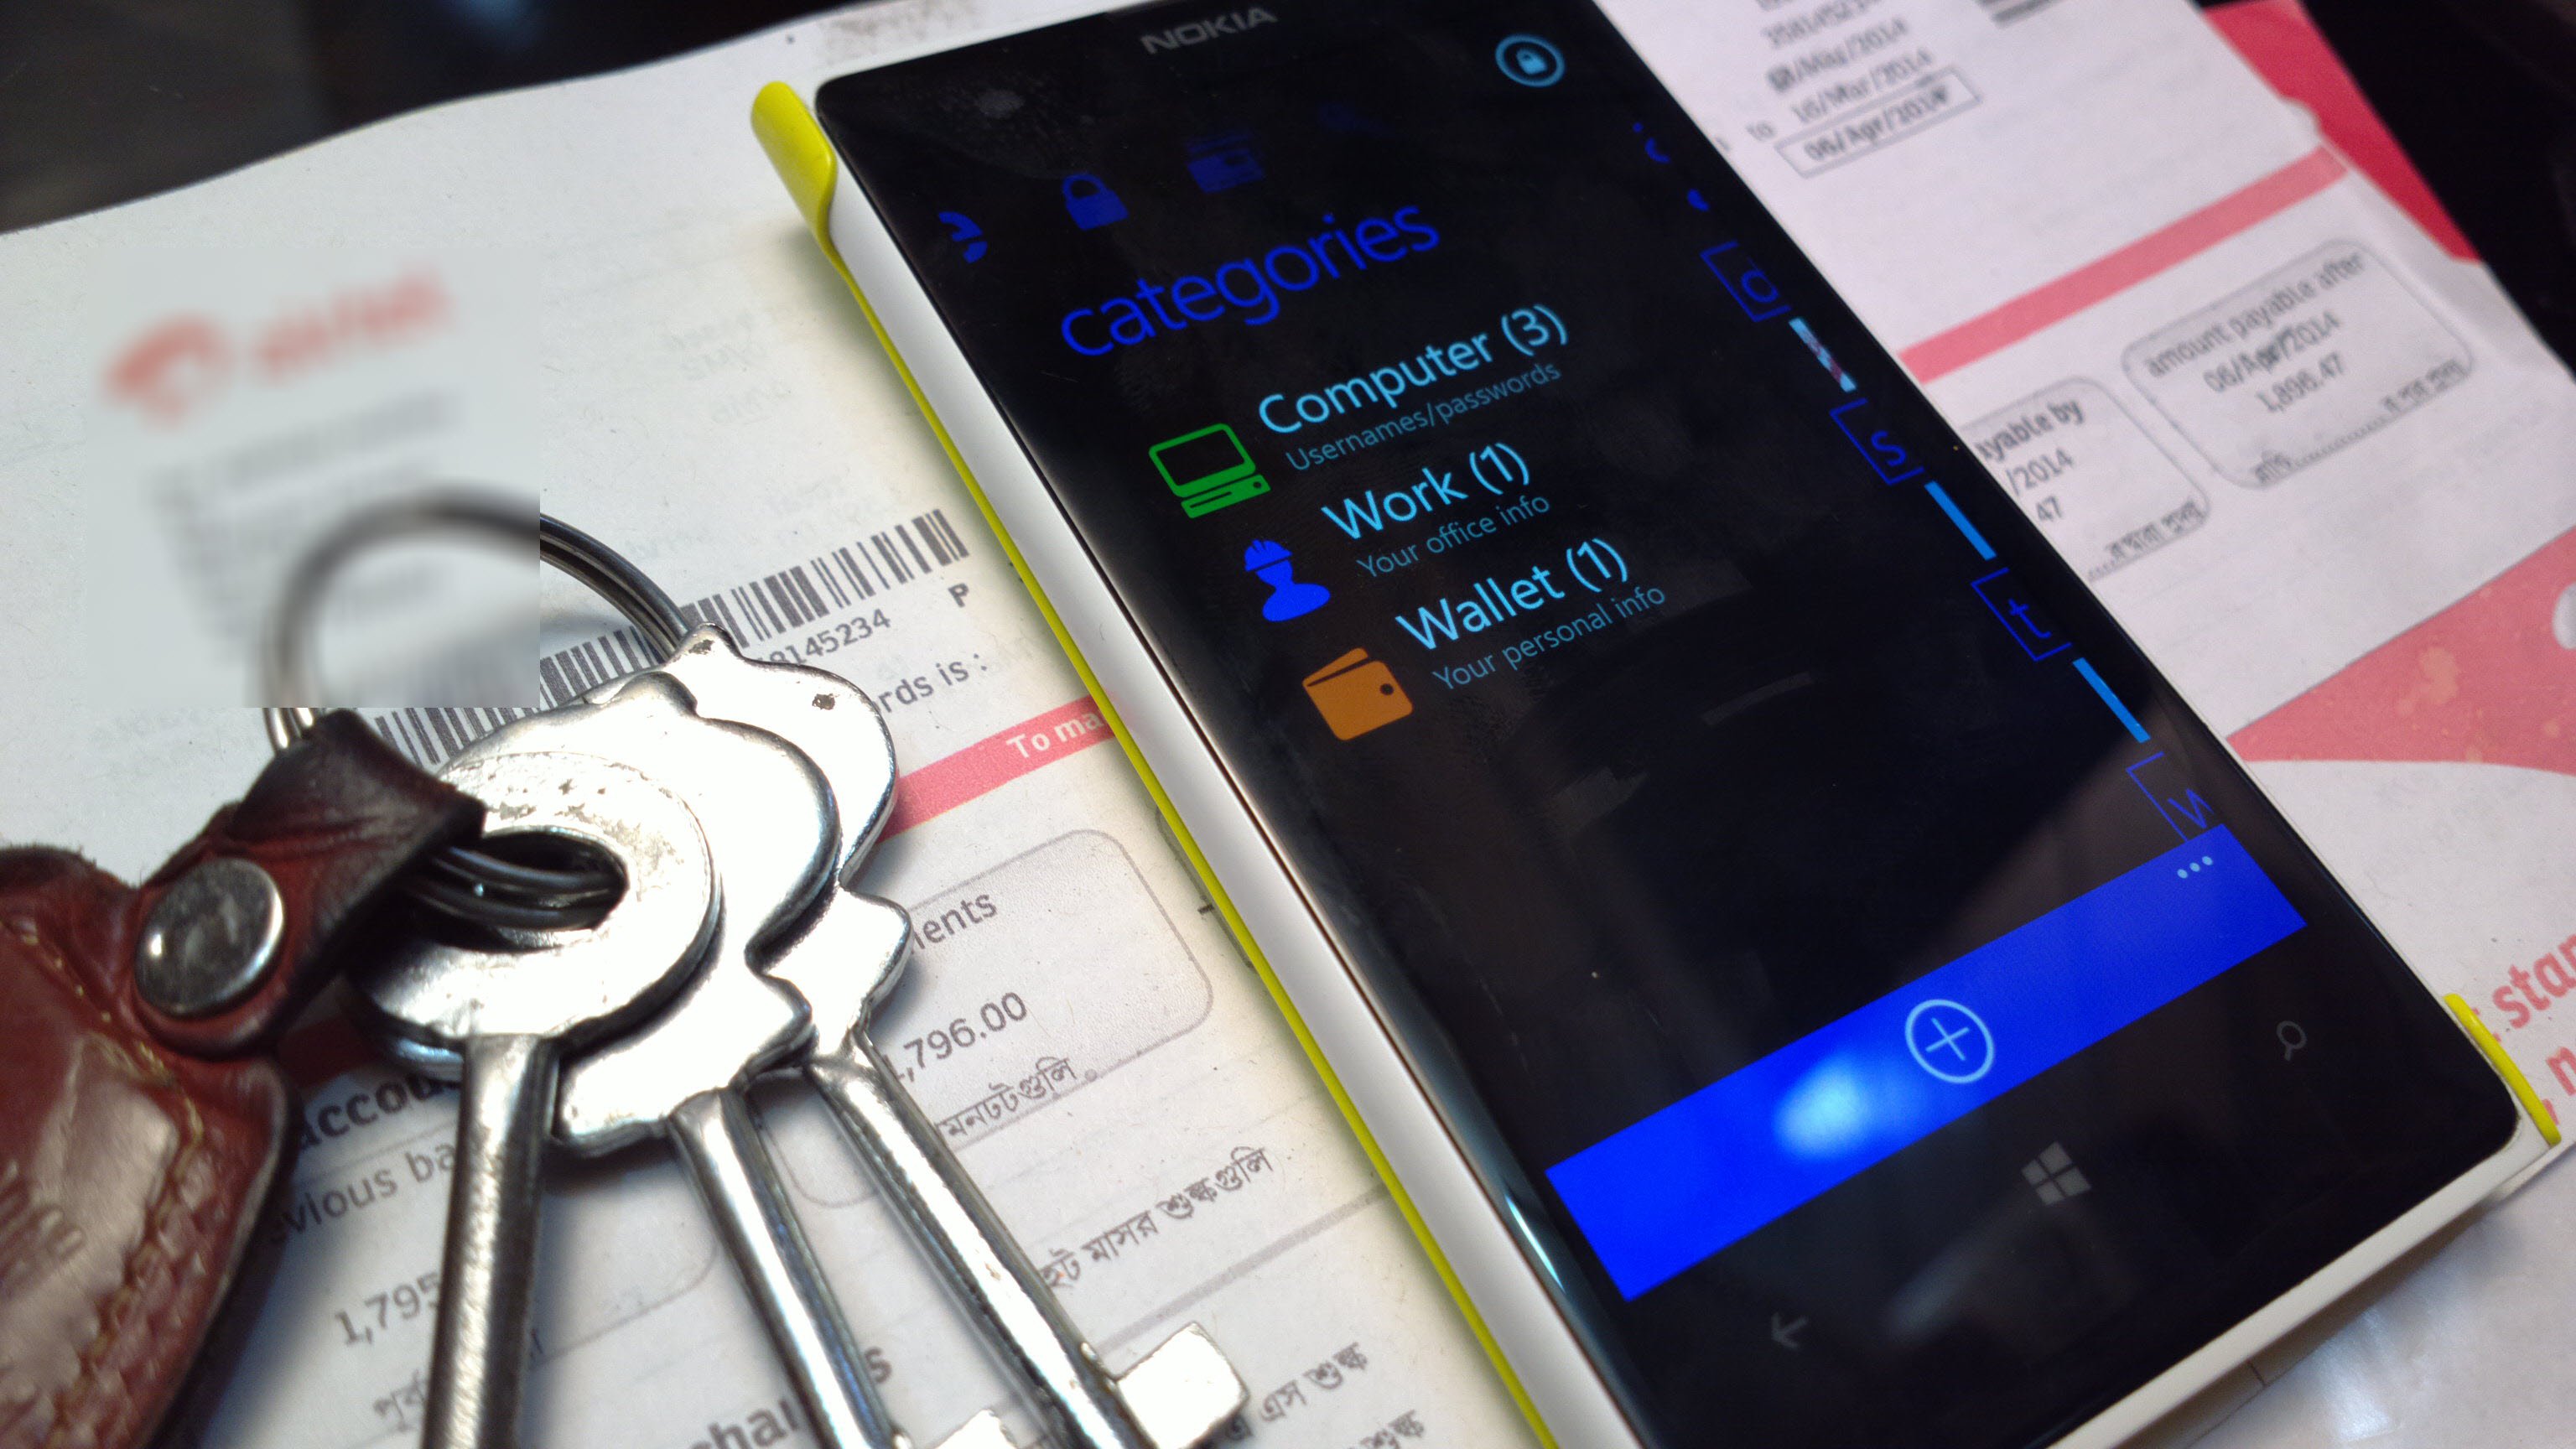 onesafe for android login